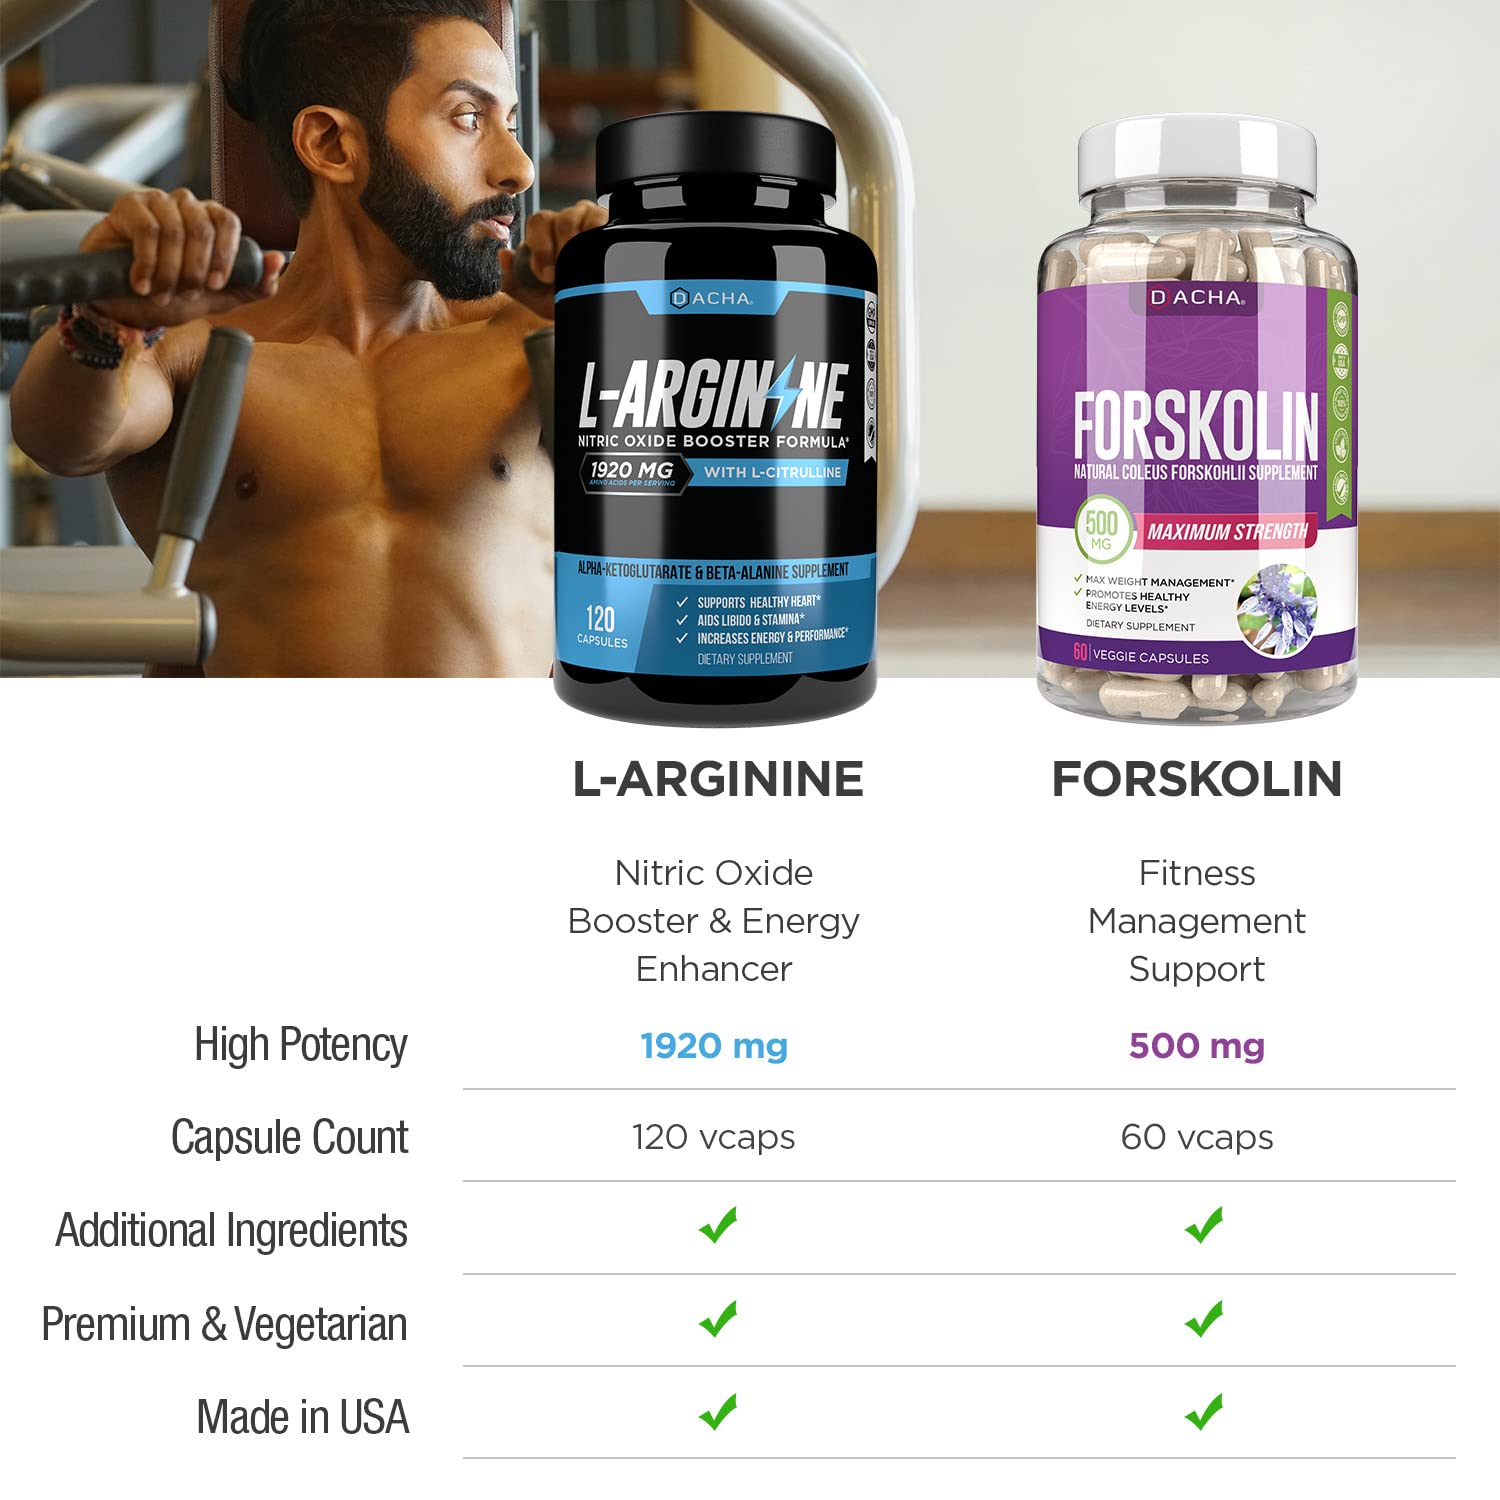 Ultimate Nitric Oxide Booster & Weight Loss Bundle – L-Arginine With Citrulline & Forskolin Extract, Potent Formula Natural Herbs For Bodybuilding, Exercise Performance, Energy Support, Max Slim Look